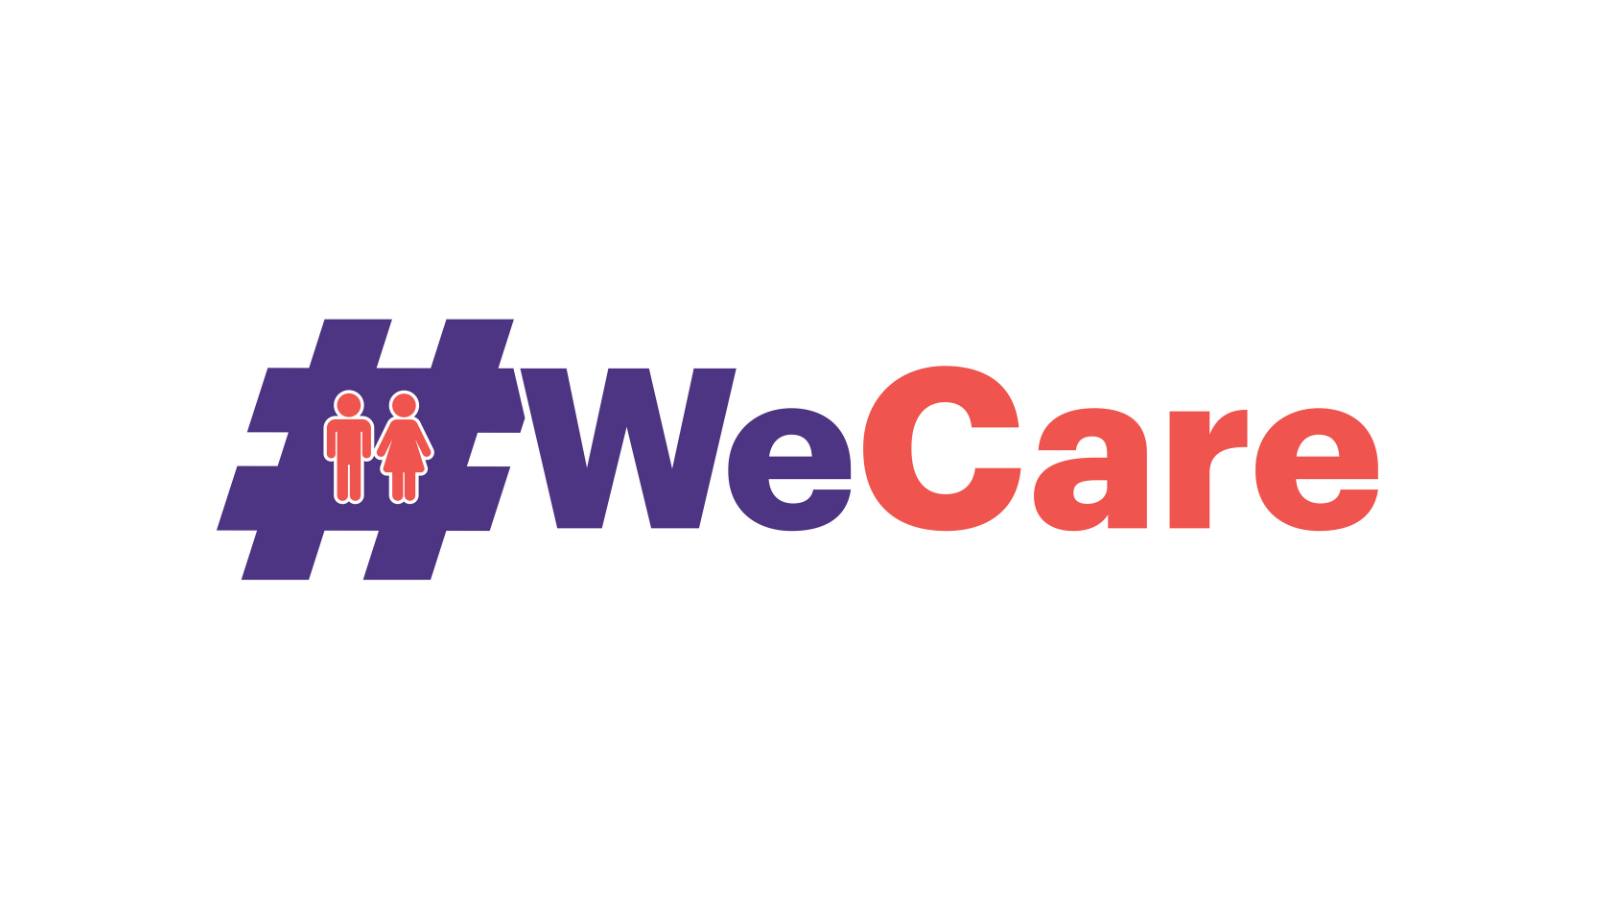 Show #WeCare by emailing your local Election Candidate